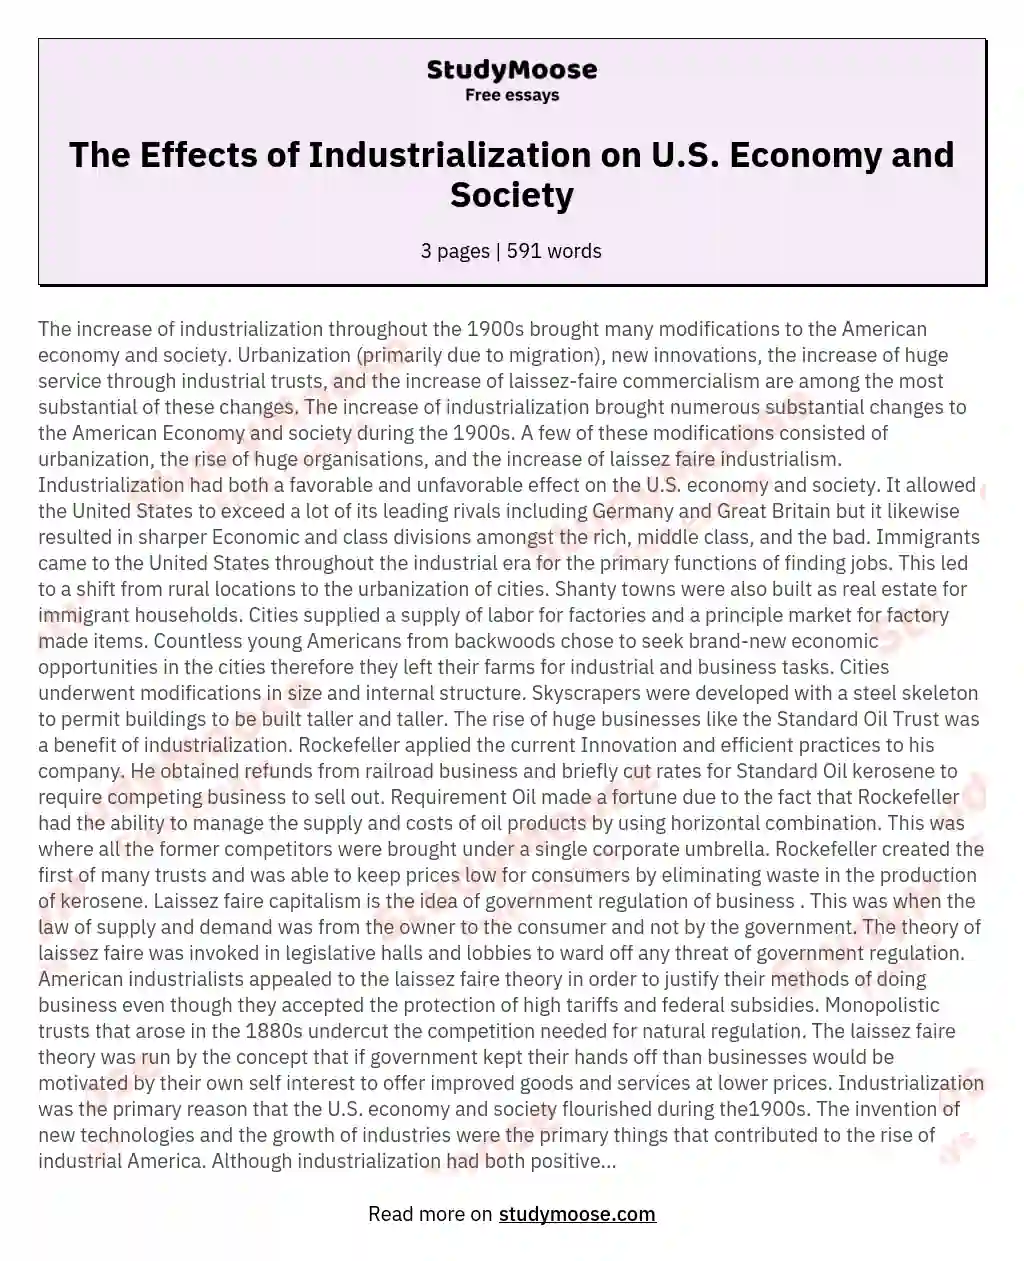 The Effects of Industrialization on U.S. Economy and Society essay